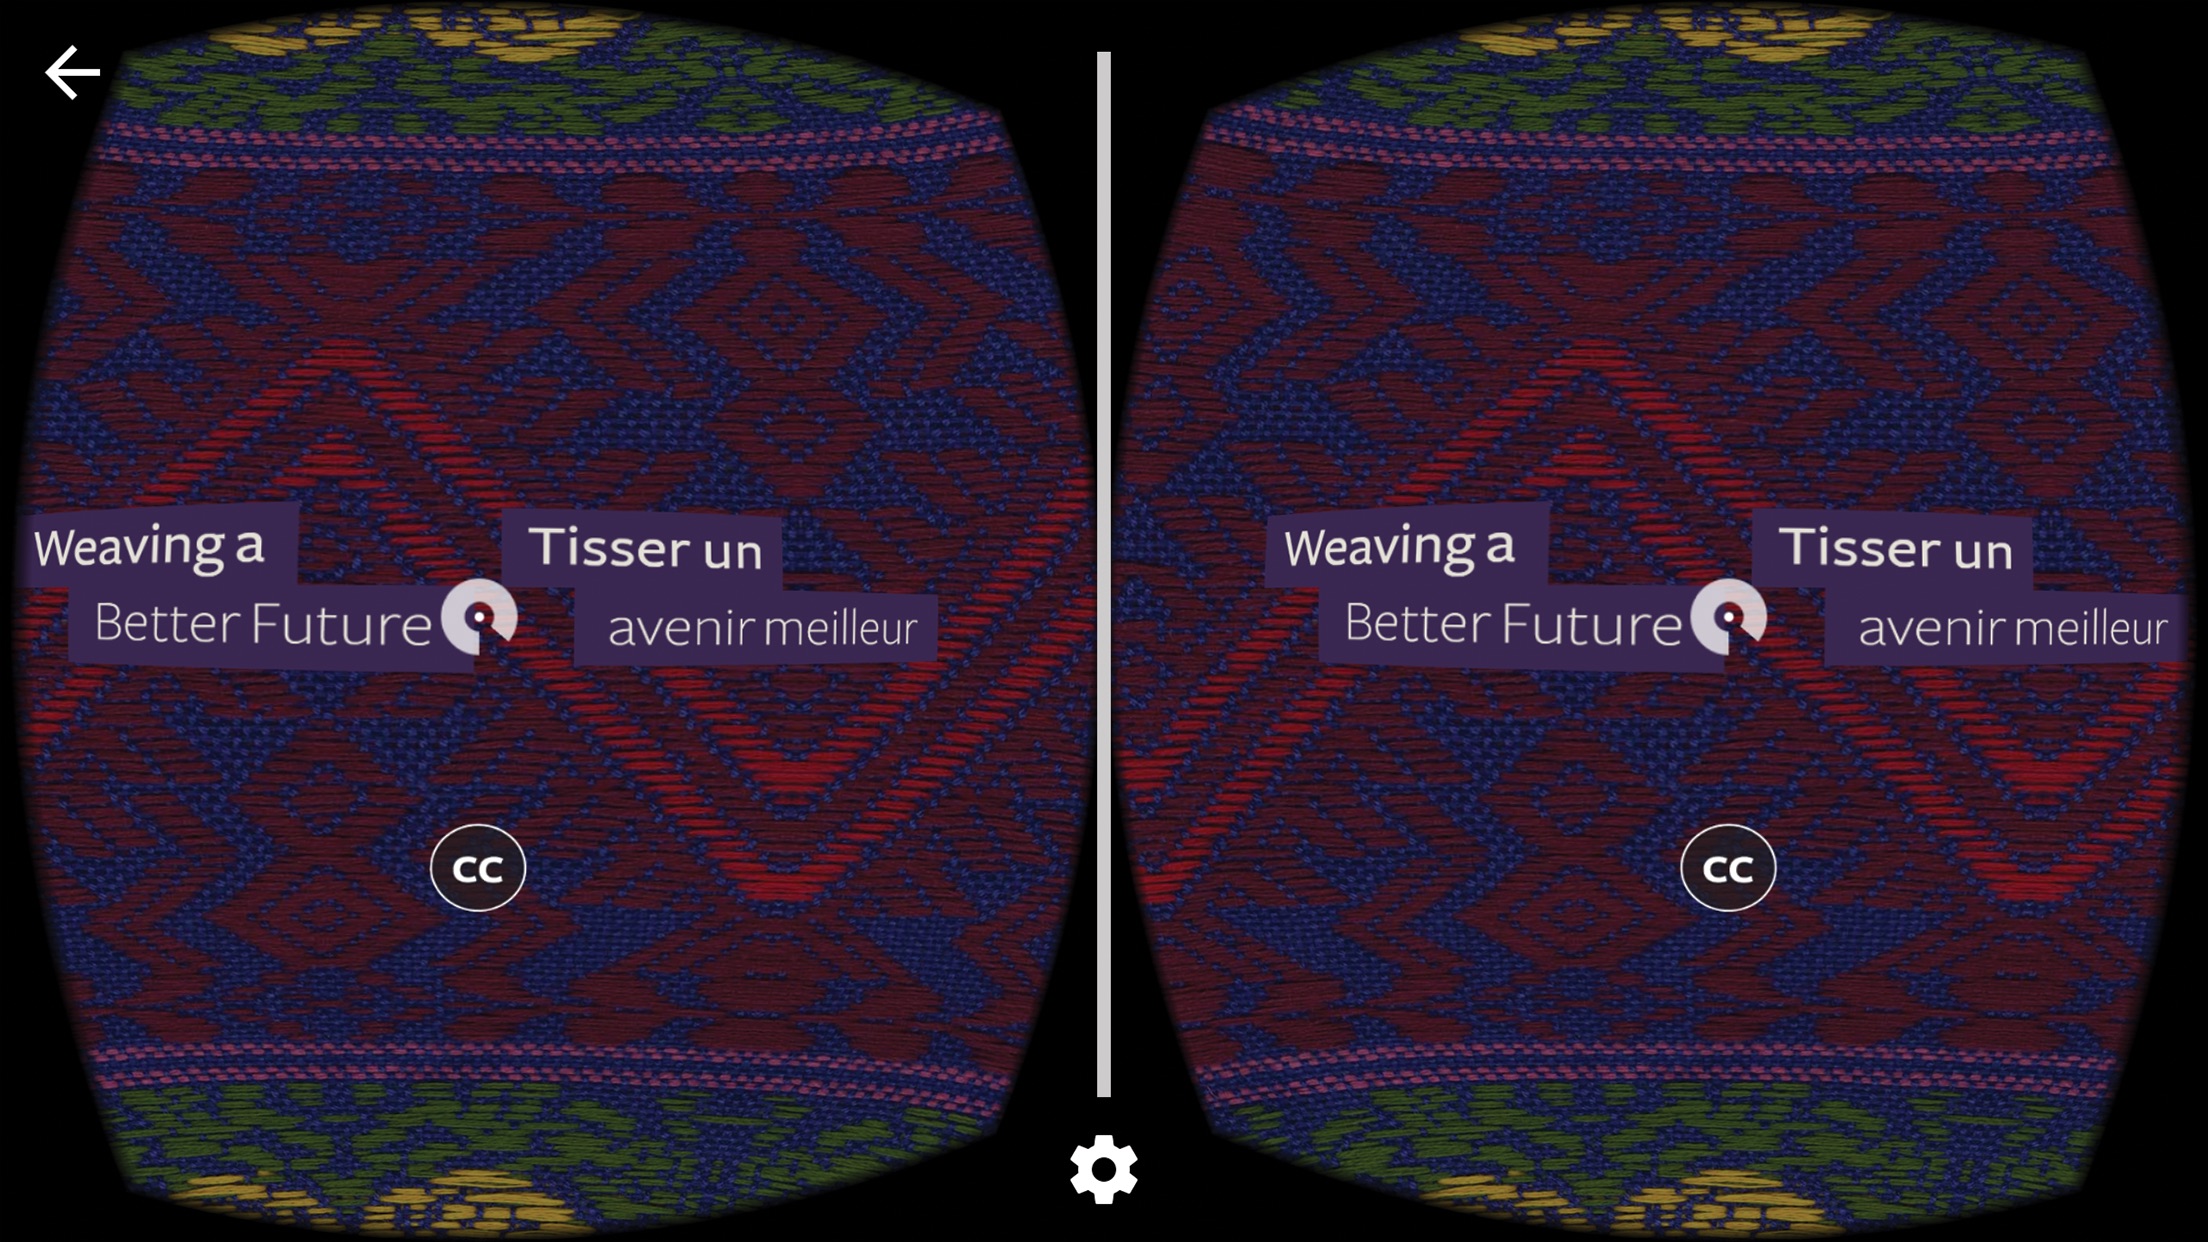 Stereoscopic view of user interface with cursor in view.